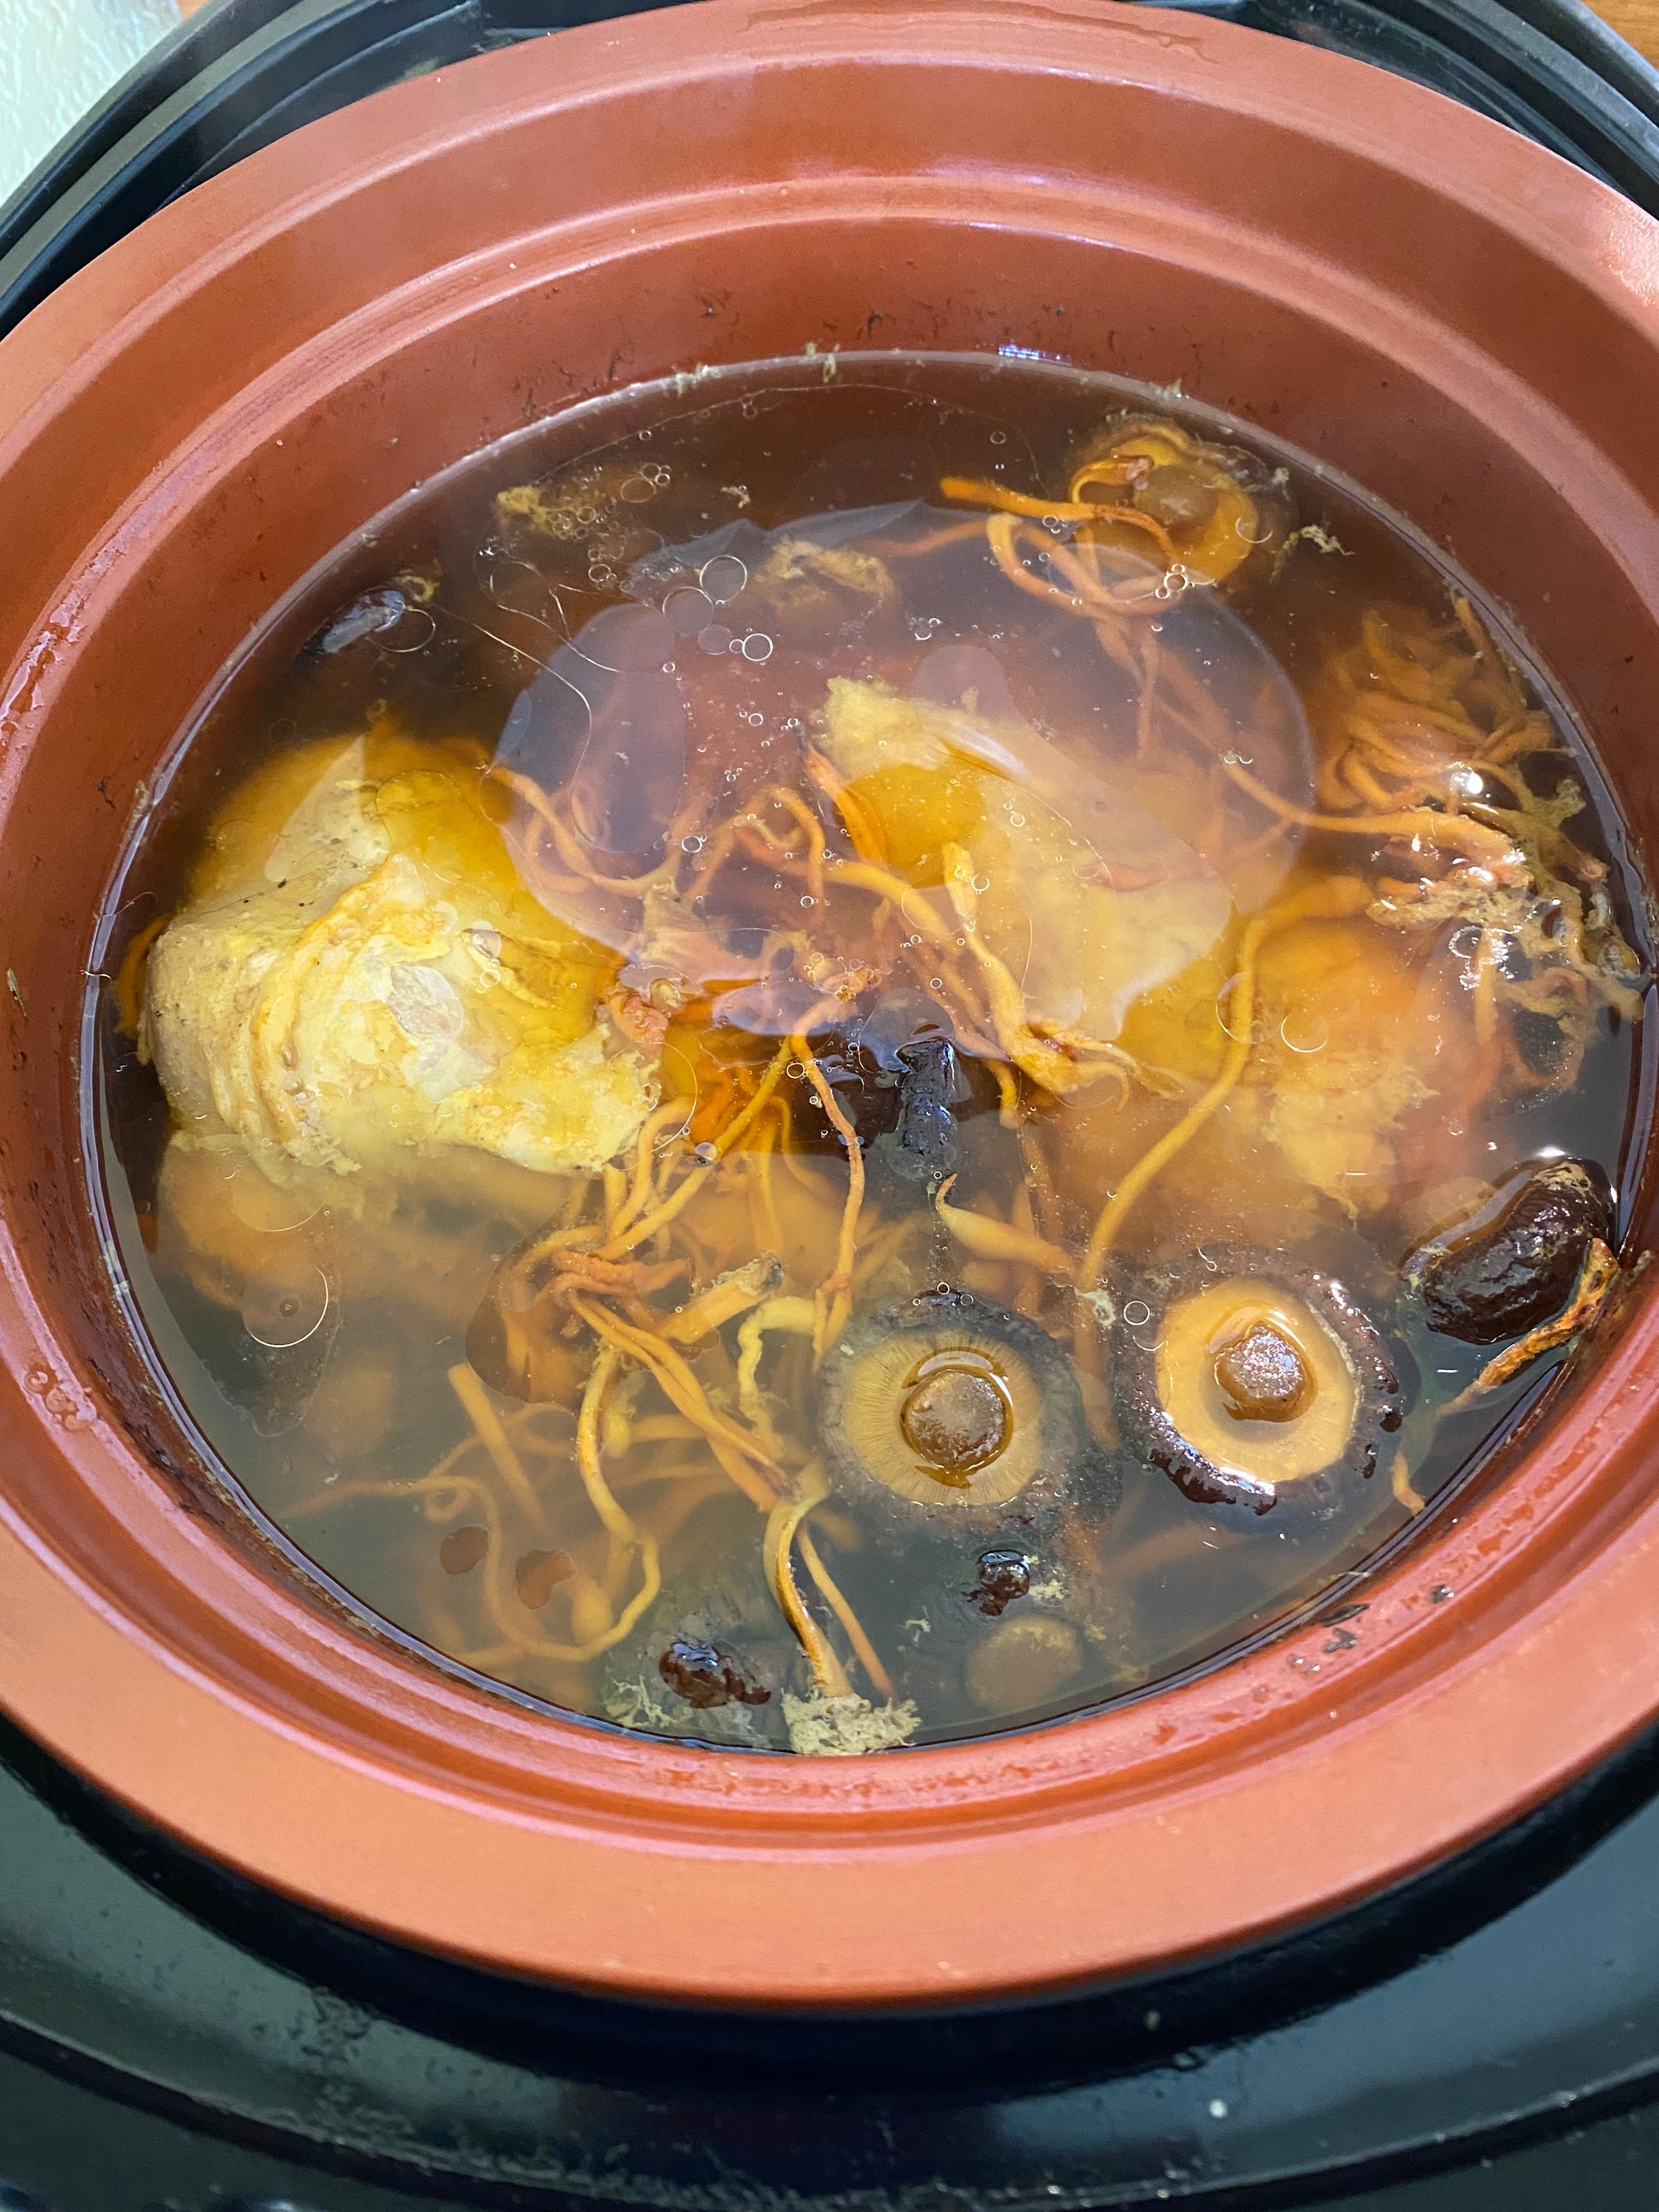 Amazing Anti-Aging, Nutritious, and Tasty Bone Broth For Beginners